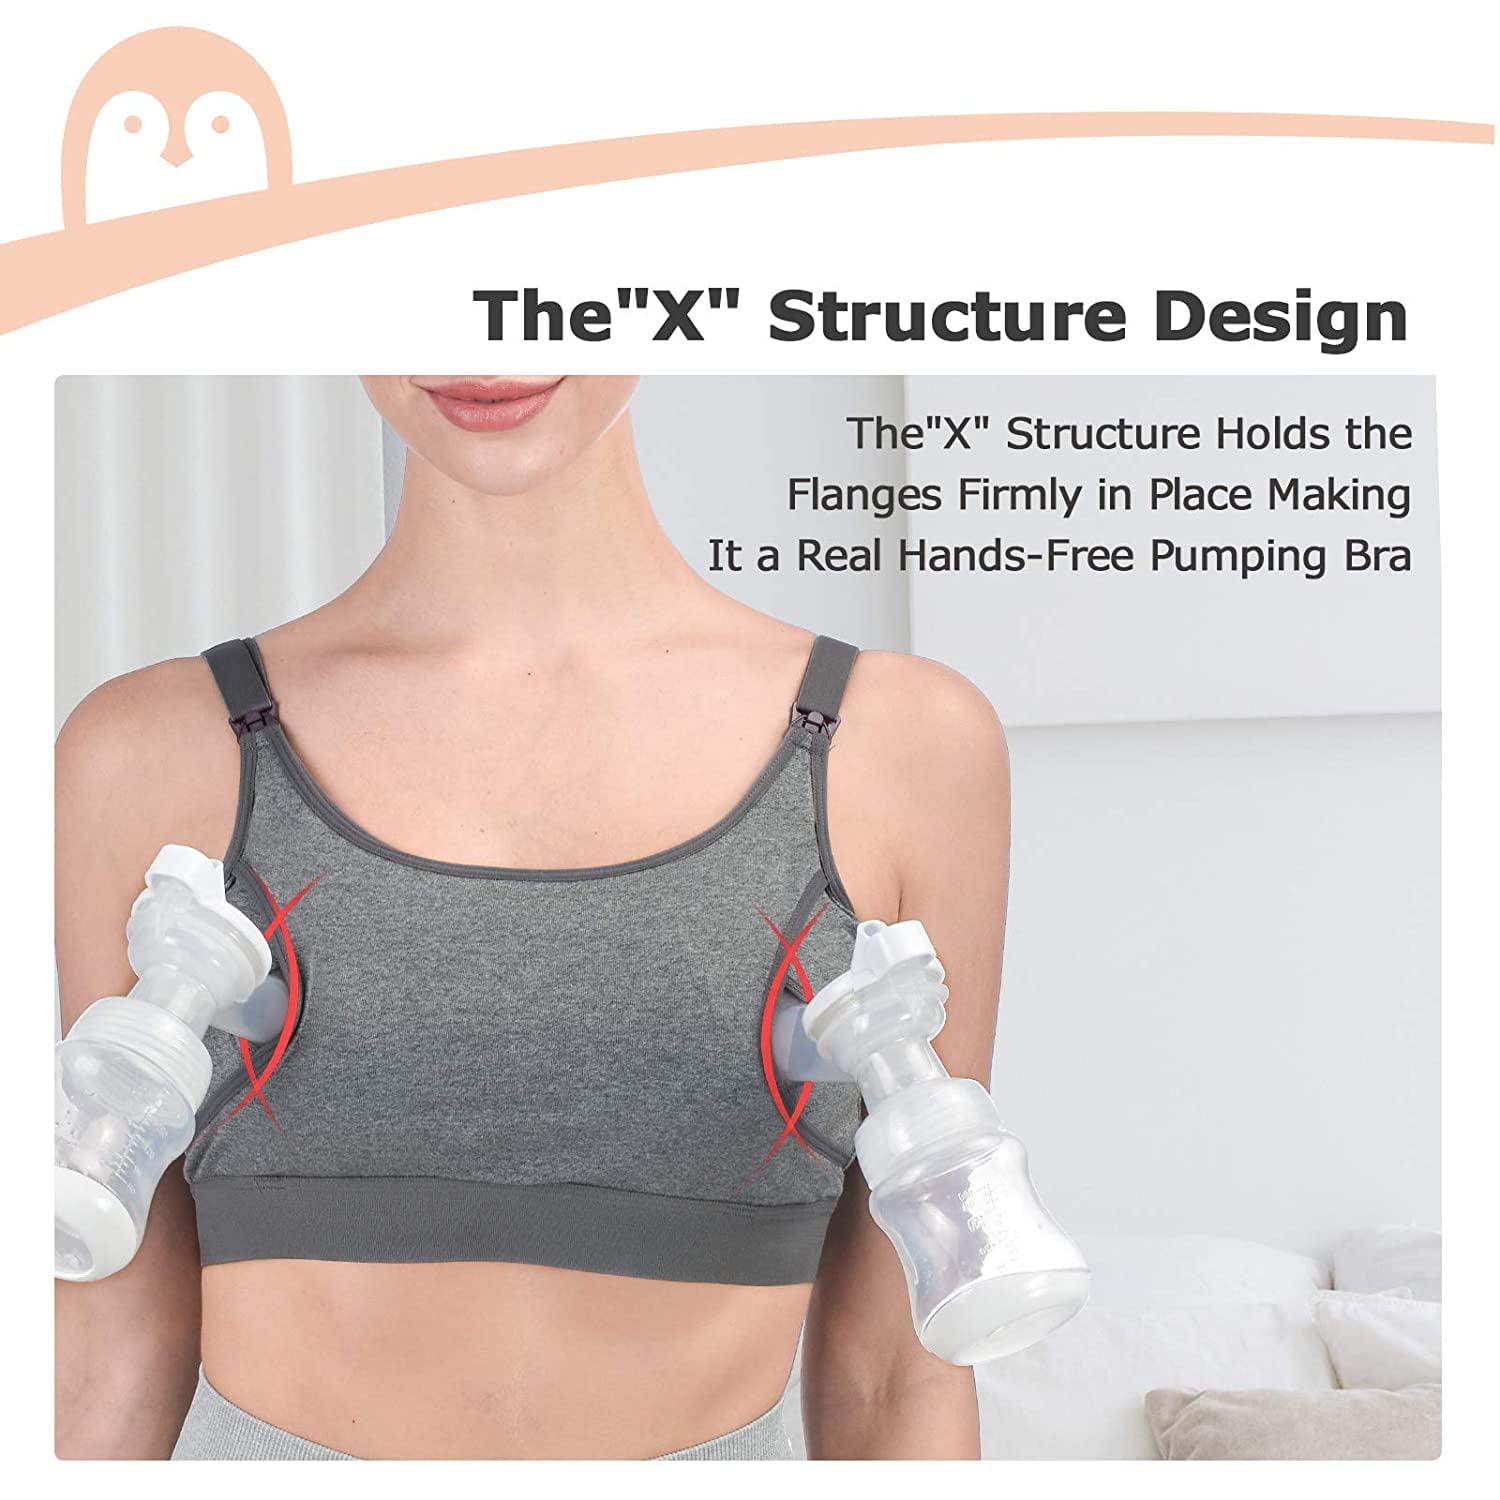 Hands Free Pumping Bra, Comfortable Breast Pump Bra with Pads, Lupantte  Adjustable Nursing Bra for Pumping .Fit Most Breast Pumps Like Spectra